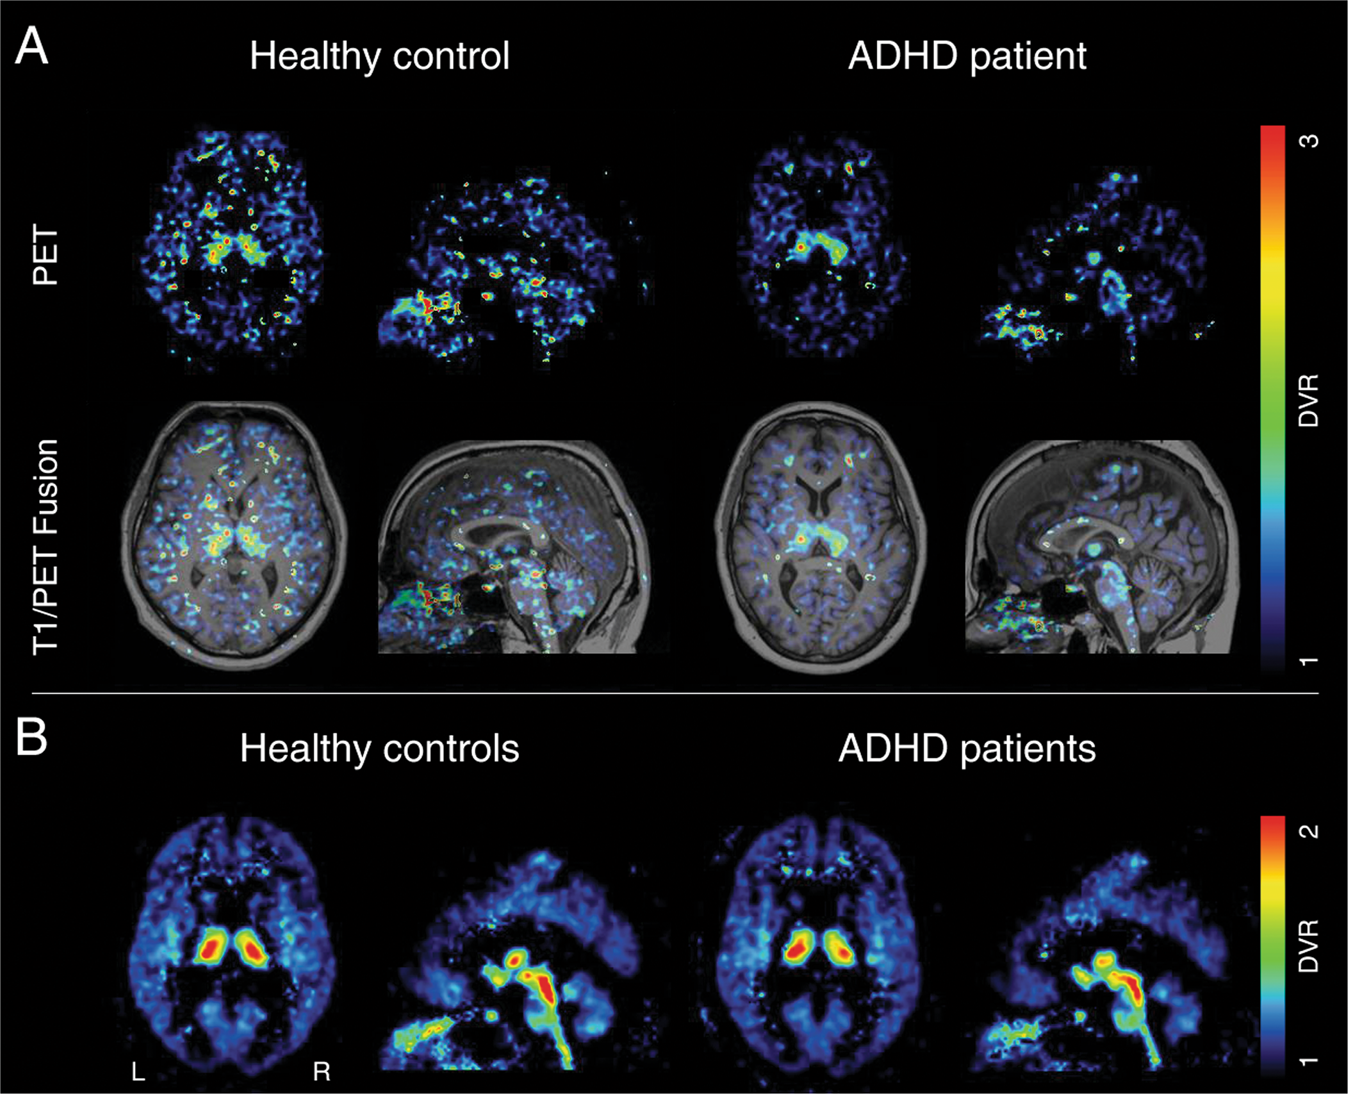 Adult disorder is associated with reduced norepinephrine transporter availability in right attention networks: a (S,S)-O-[11C]methylreboxetine positron emission tomography study | Translational Psychiatry